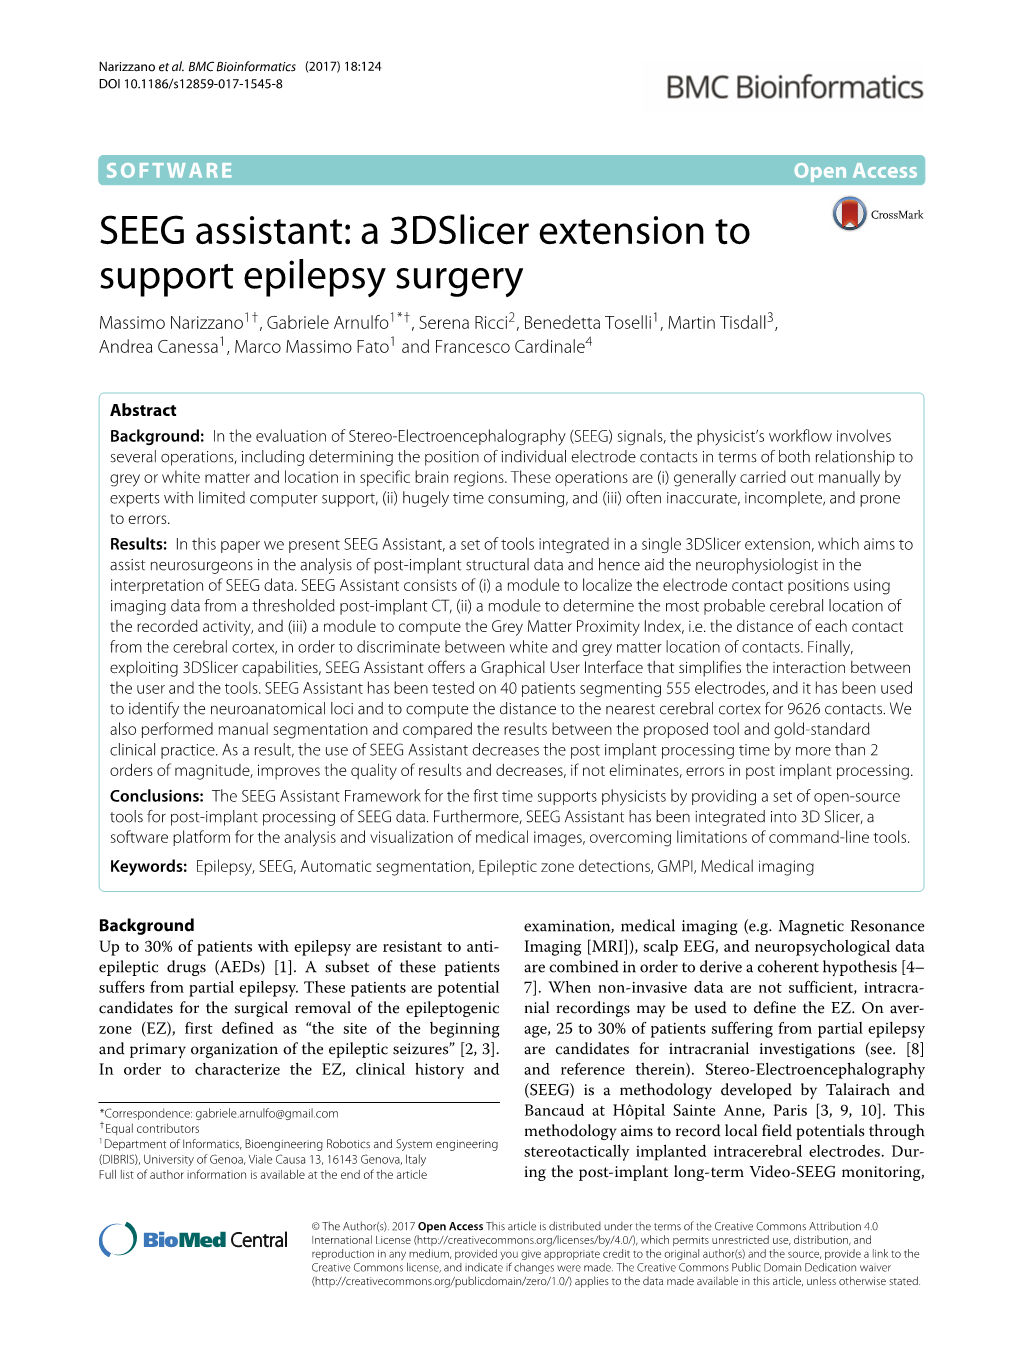 SEEG Assistant: a 3Dslicer Extension to Support Epilepsy Surgery